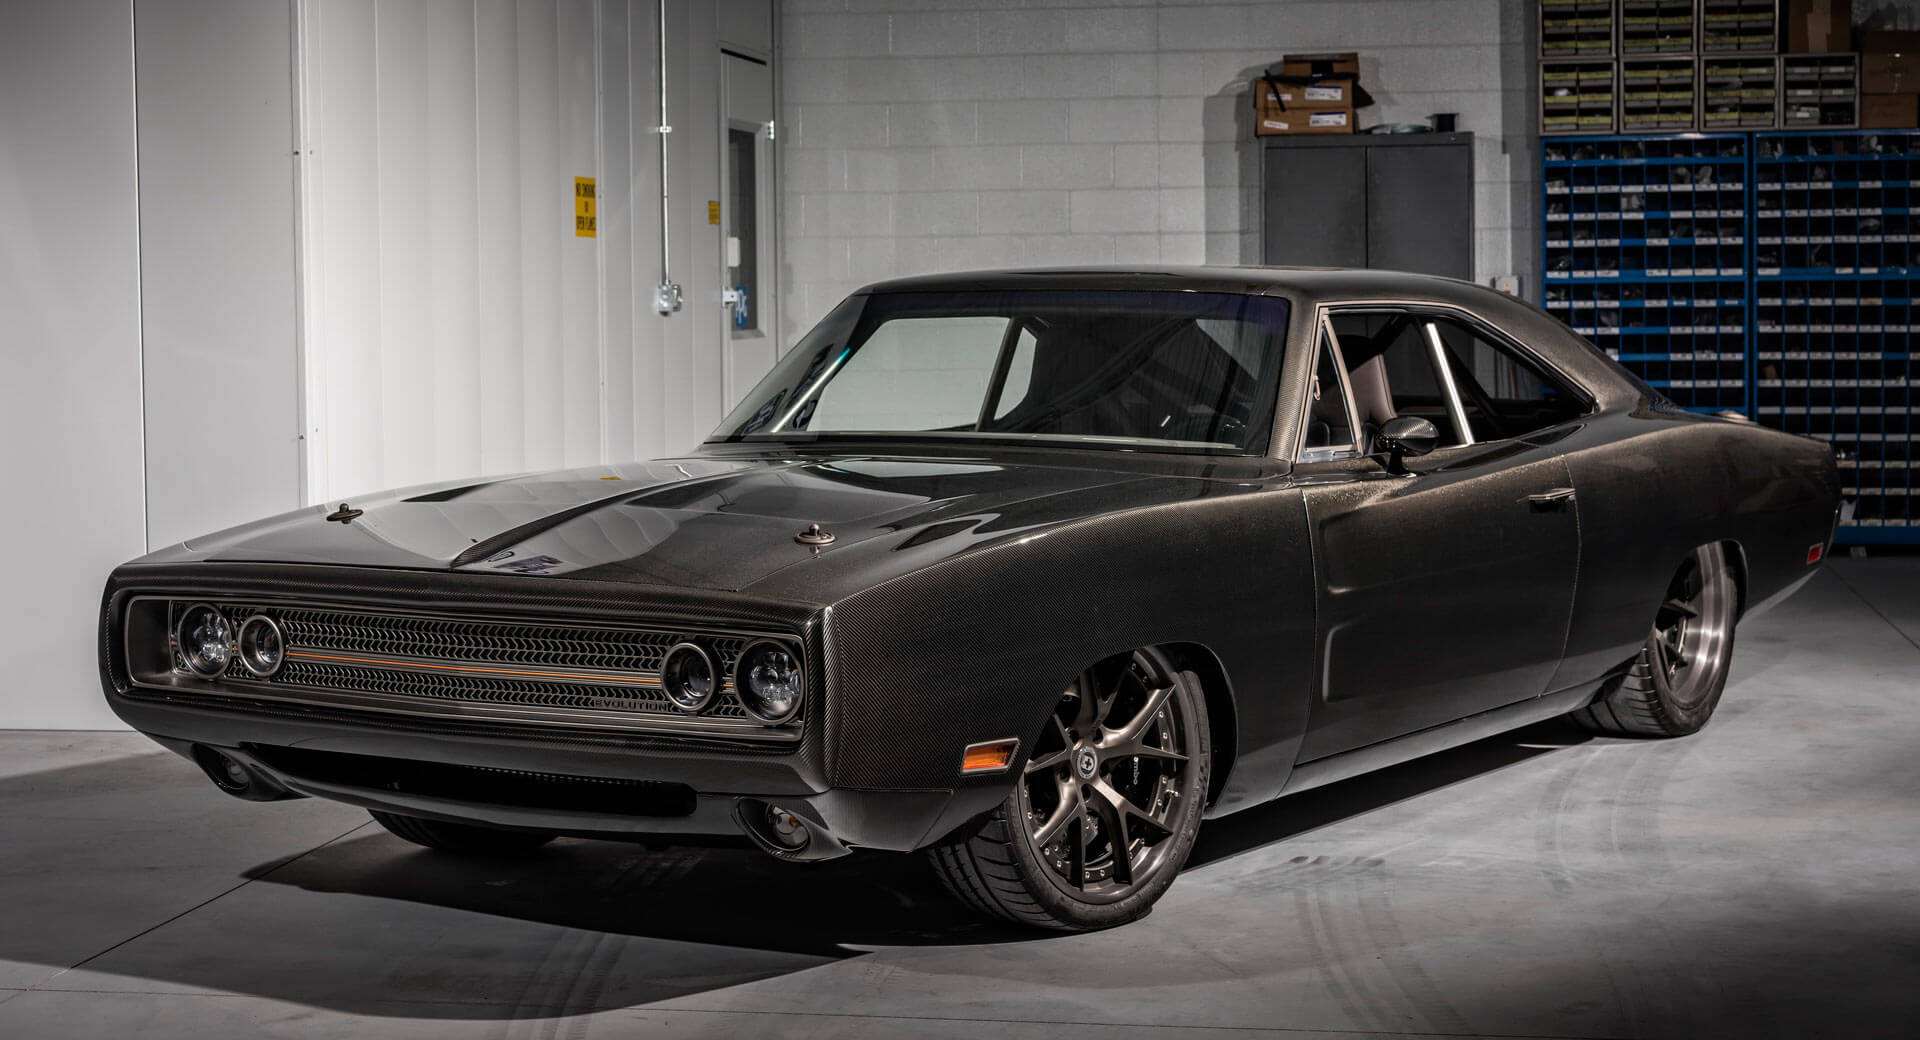 SpeedKore's 966 WHP 1970 Dodge Charger Evolution Might Be SEMA's Most